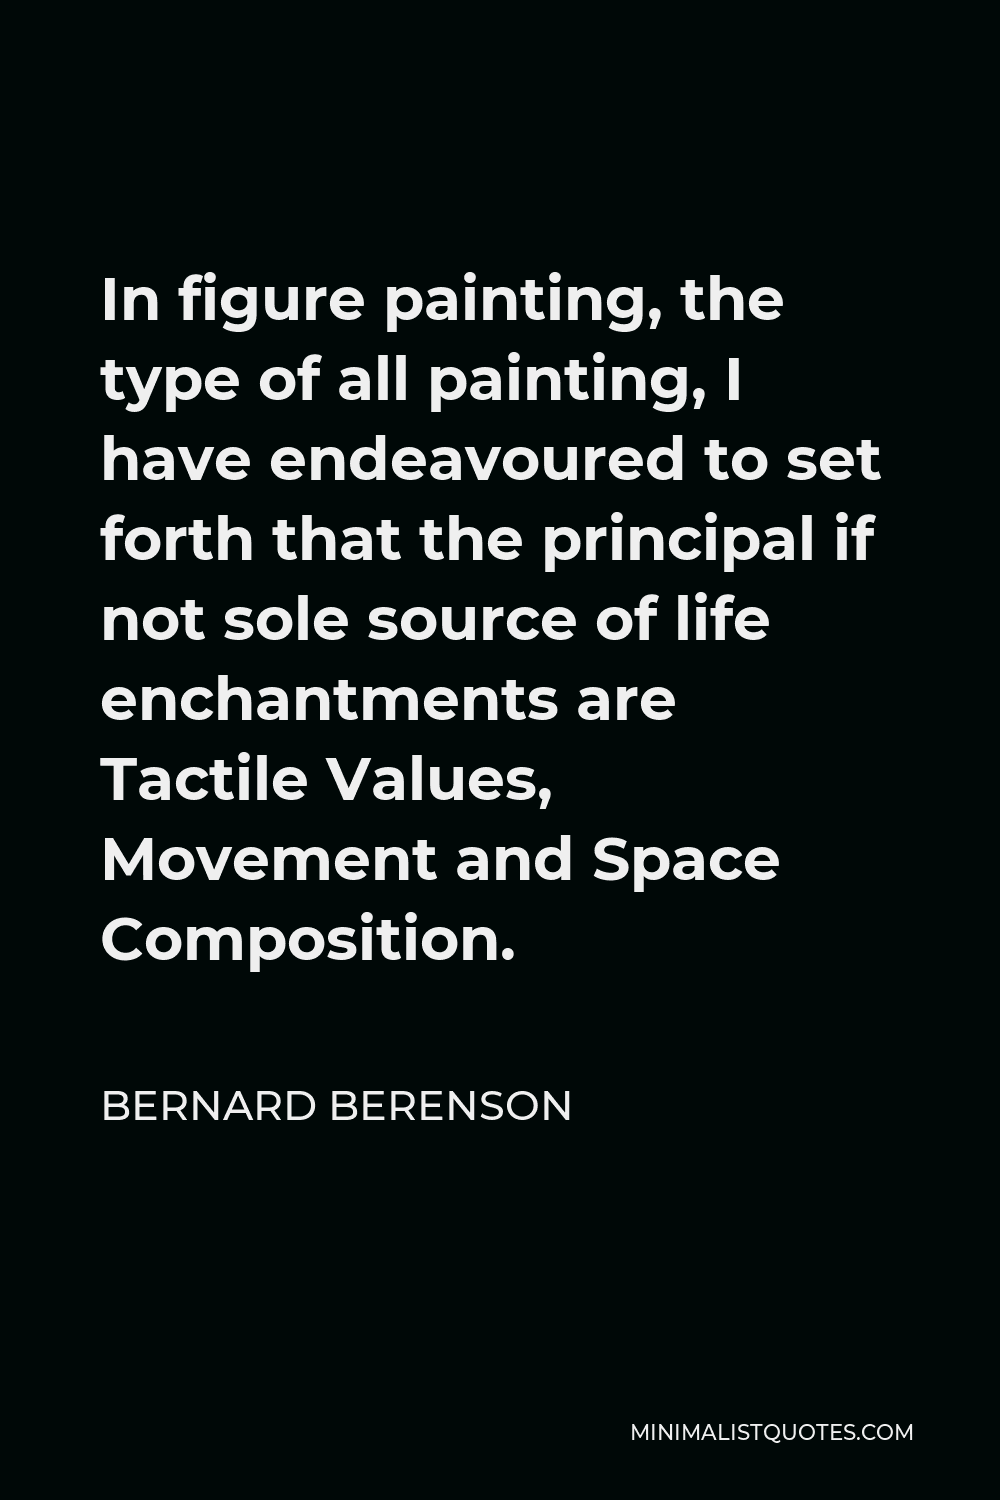 Bernard Berenson Quote - In figure painting, the type of all painting, I have endeavoured to set forth that the principal if not sole source of life enchantments are Tactile Values, Movement and Space Composition.